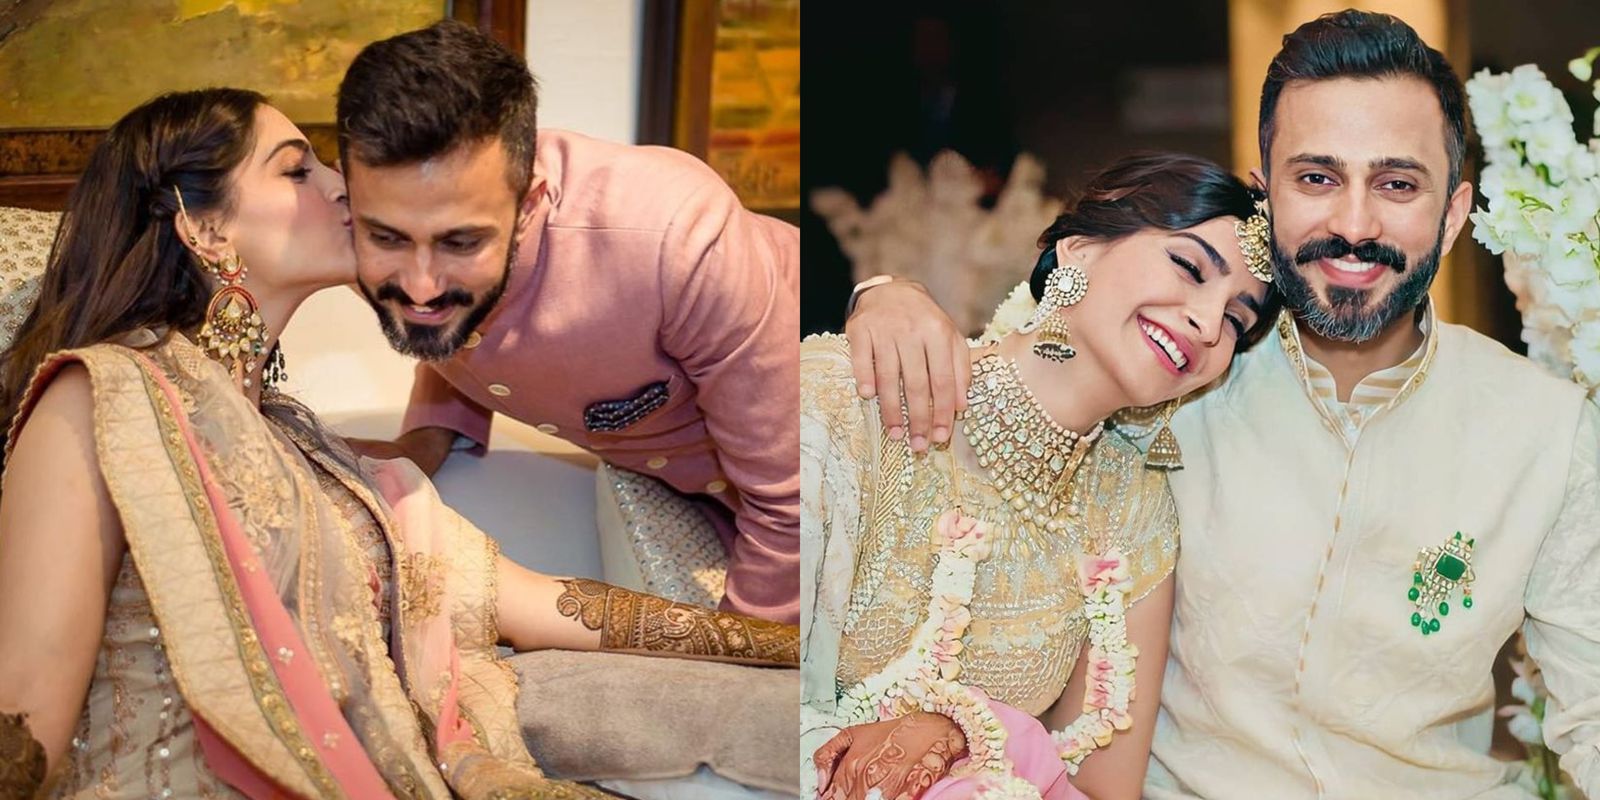 Sonam Kapoor-Anand Ahuja Anniversary: Family And Friends Wish The Happy Couple Along With Adorable Unseen Photos